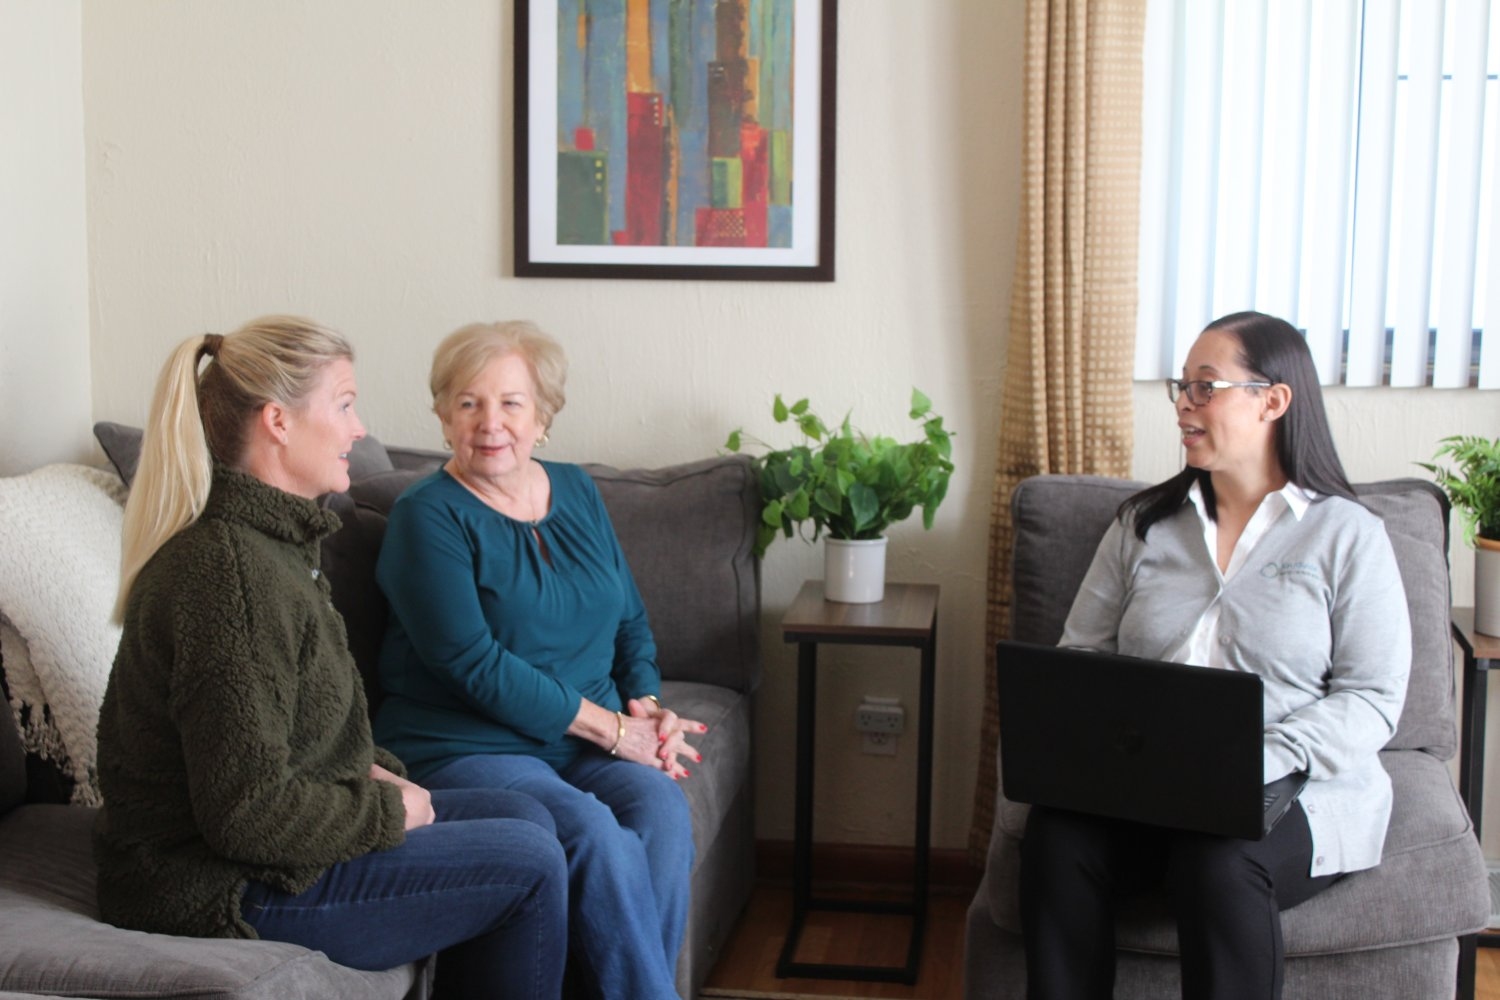 MIT research informs design of new coordination service for family caregivers